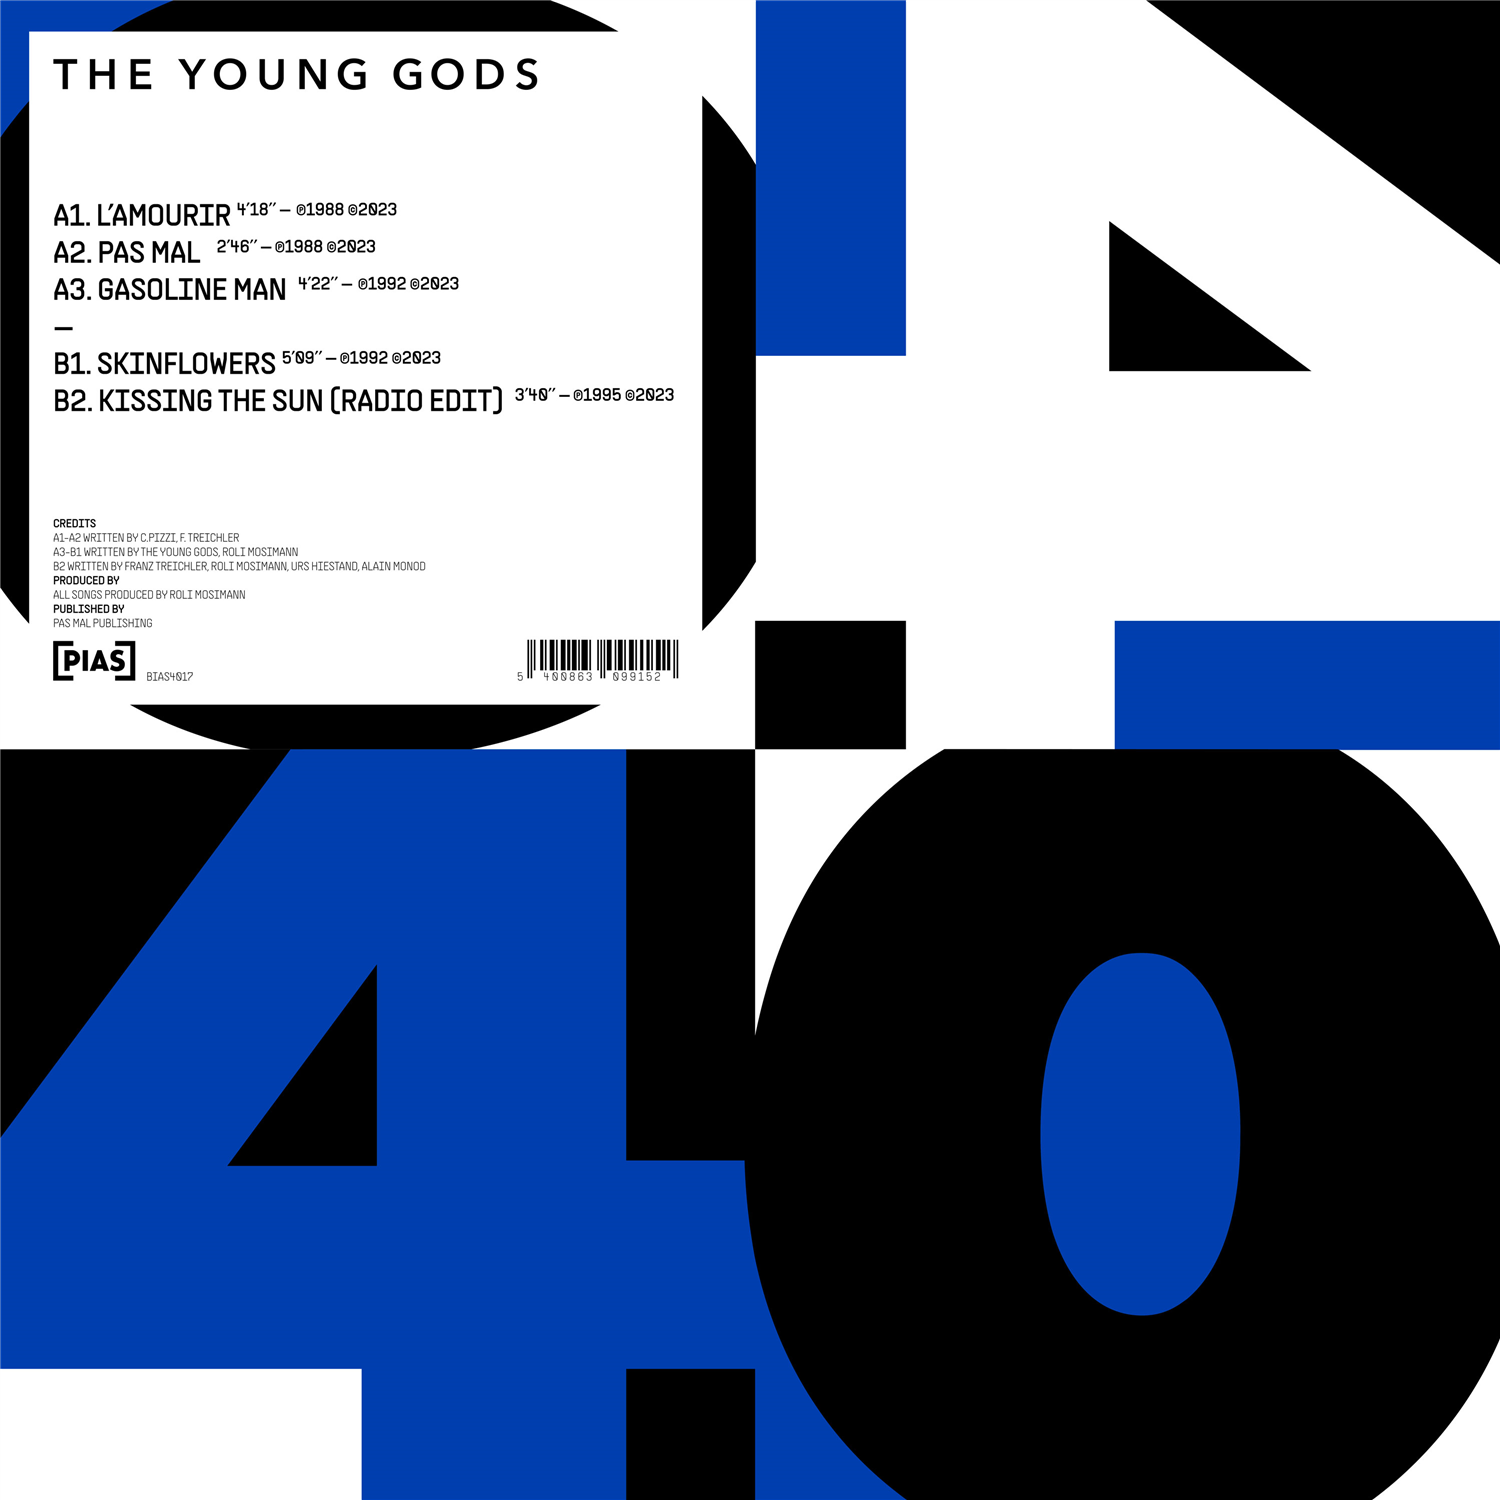 The Young Gods - [PIAS] 40 (The Young Gods): Vinyl 12" EP